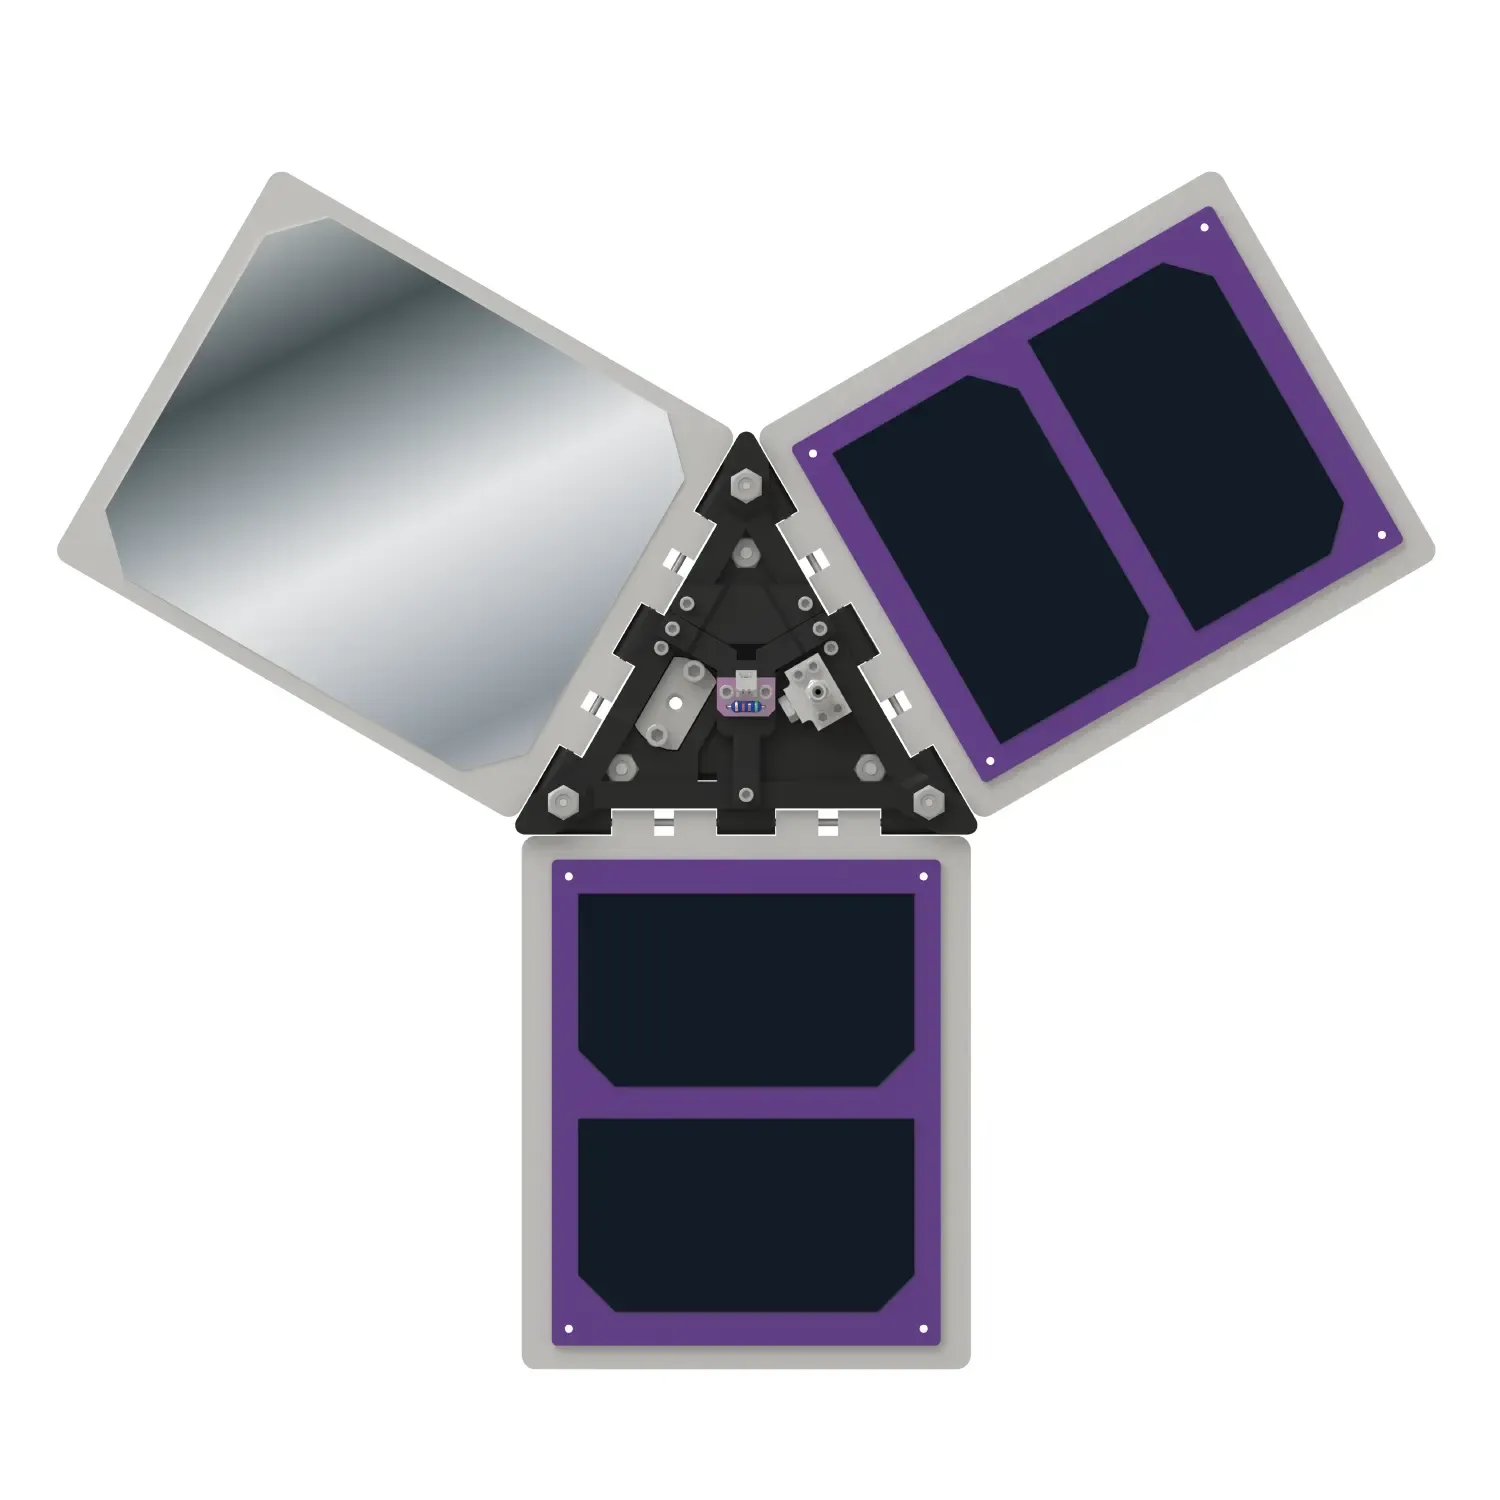 CAD render of bottom of small satellite subsystem.